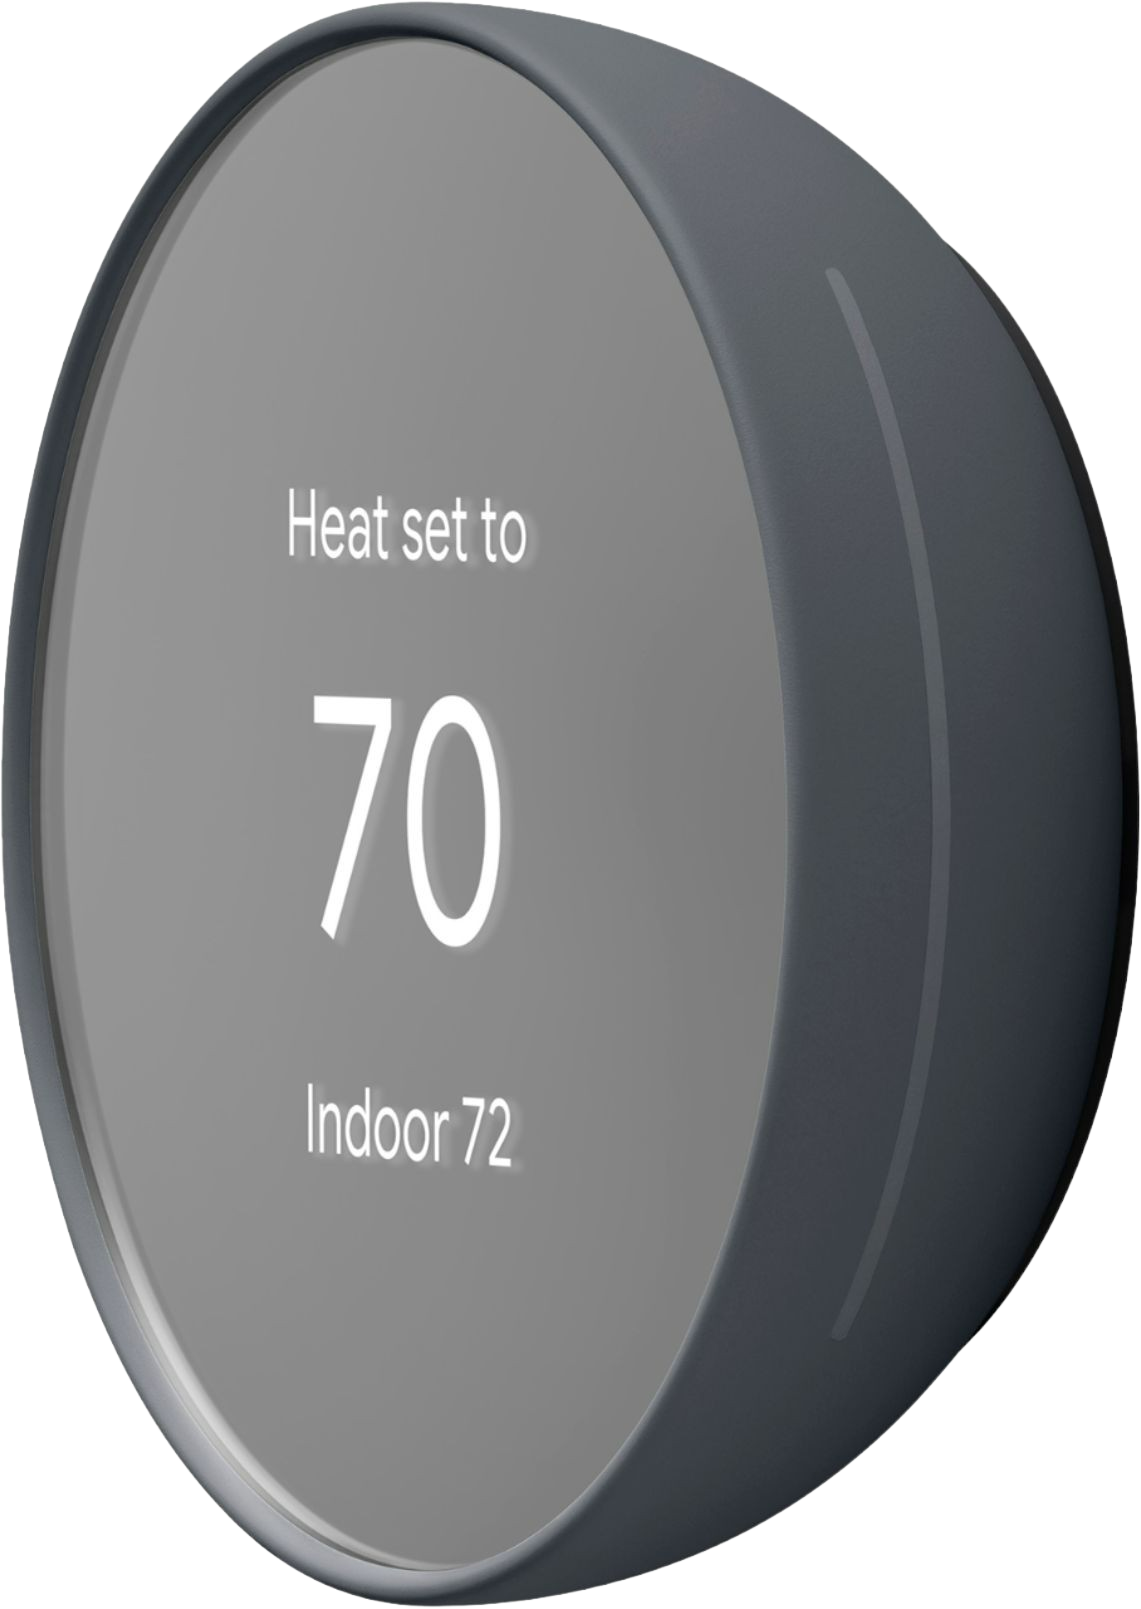 Rent Google Nest Thermostat from $7.90 per month